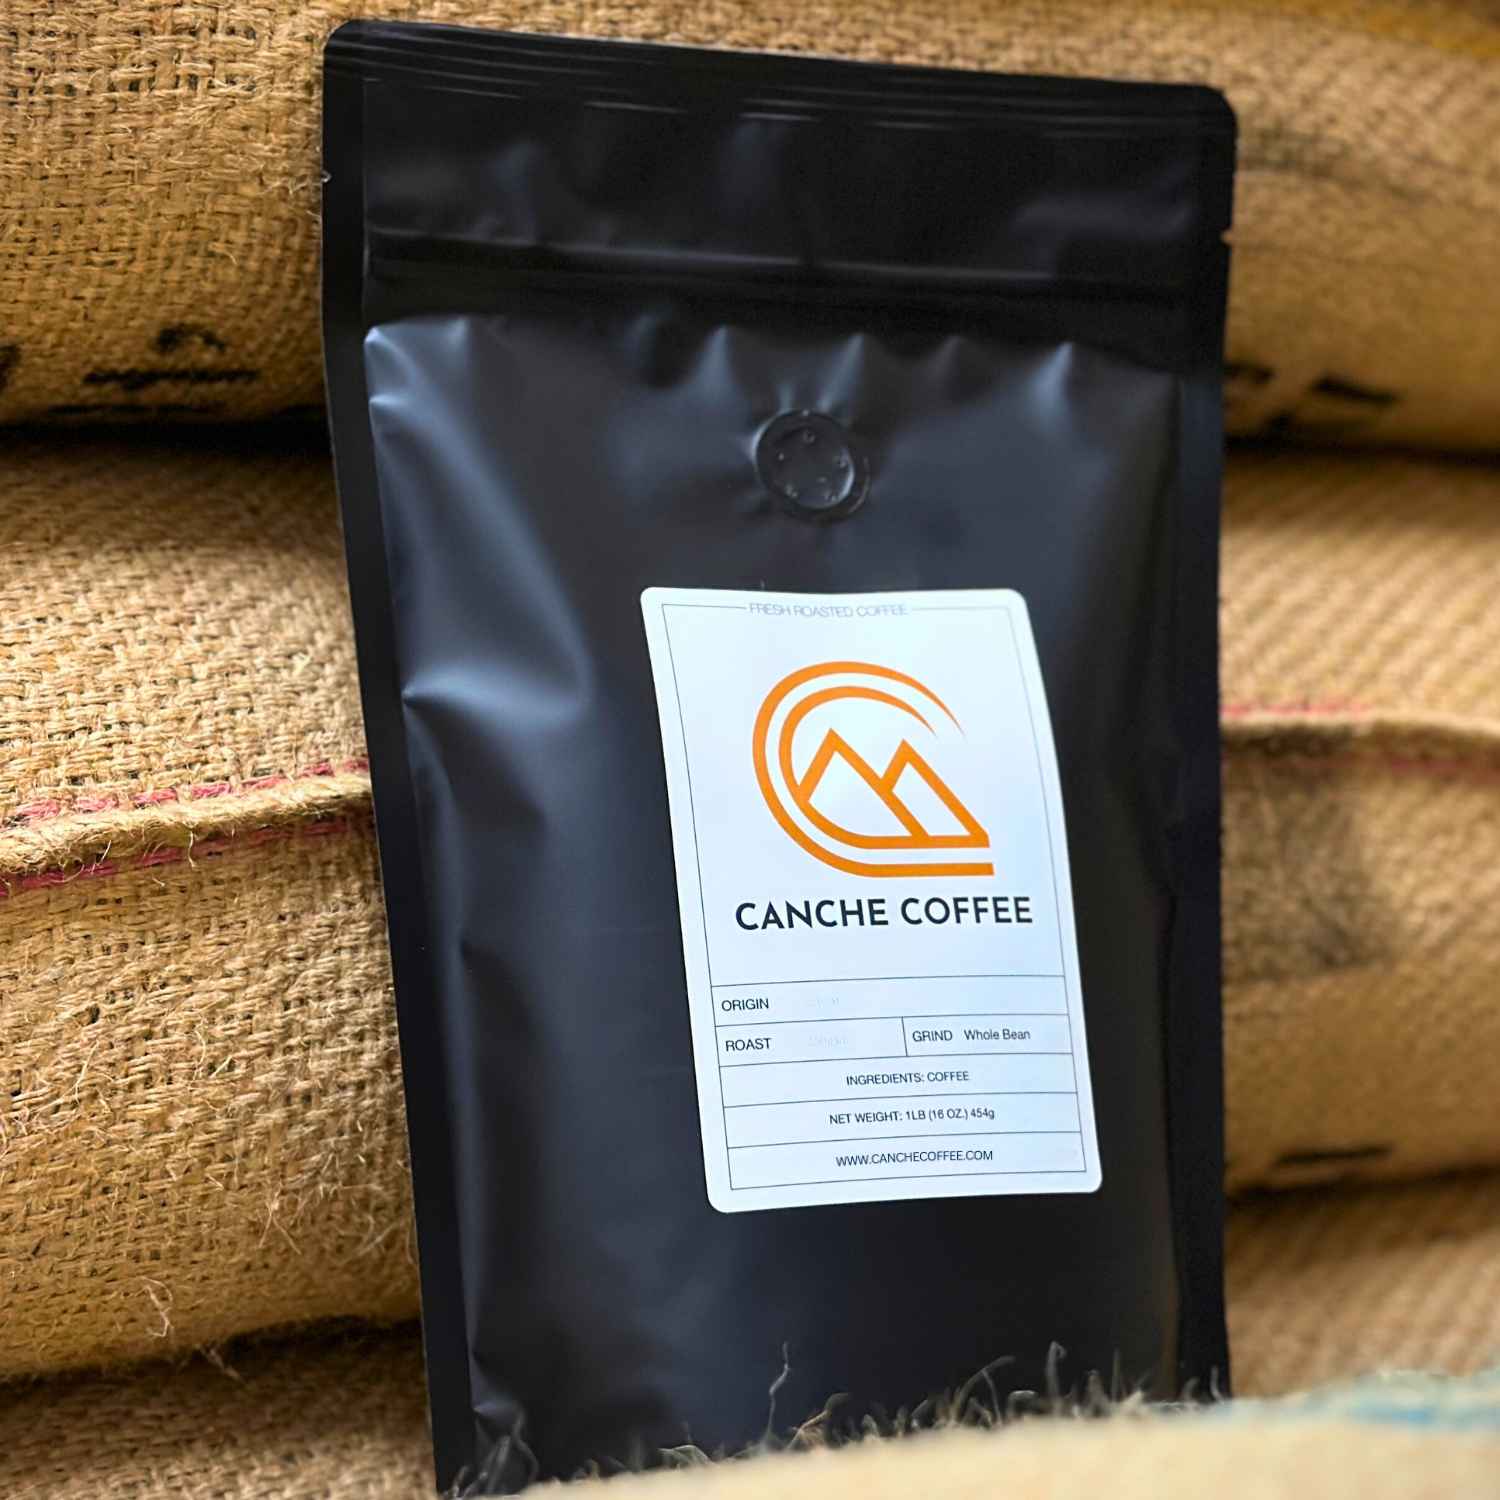 Asian Plateau Blend - Canche Coffee